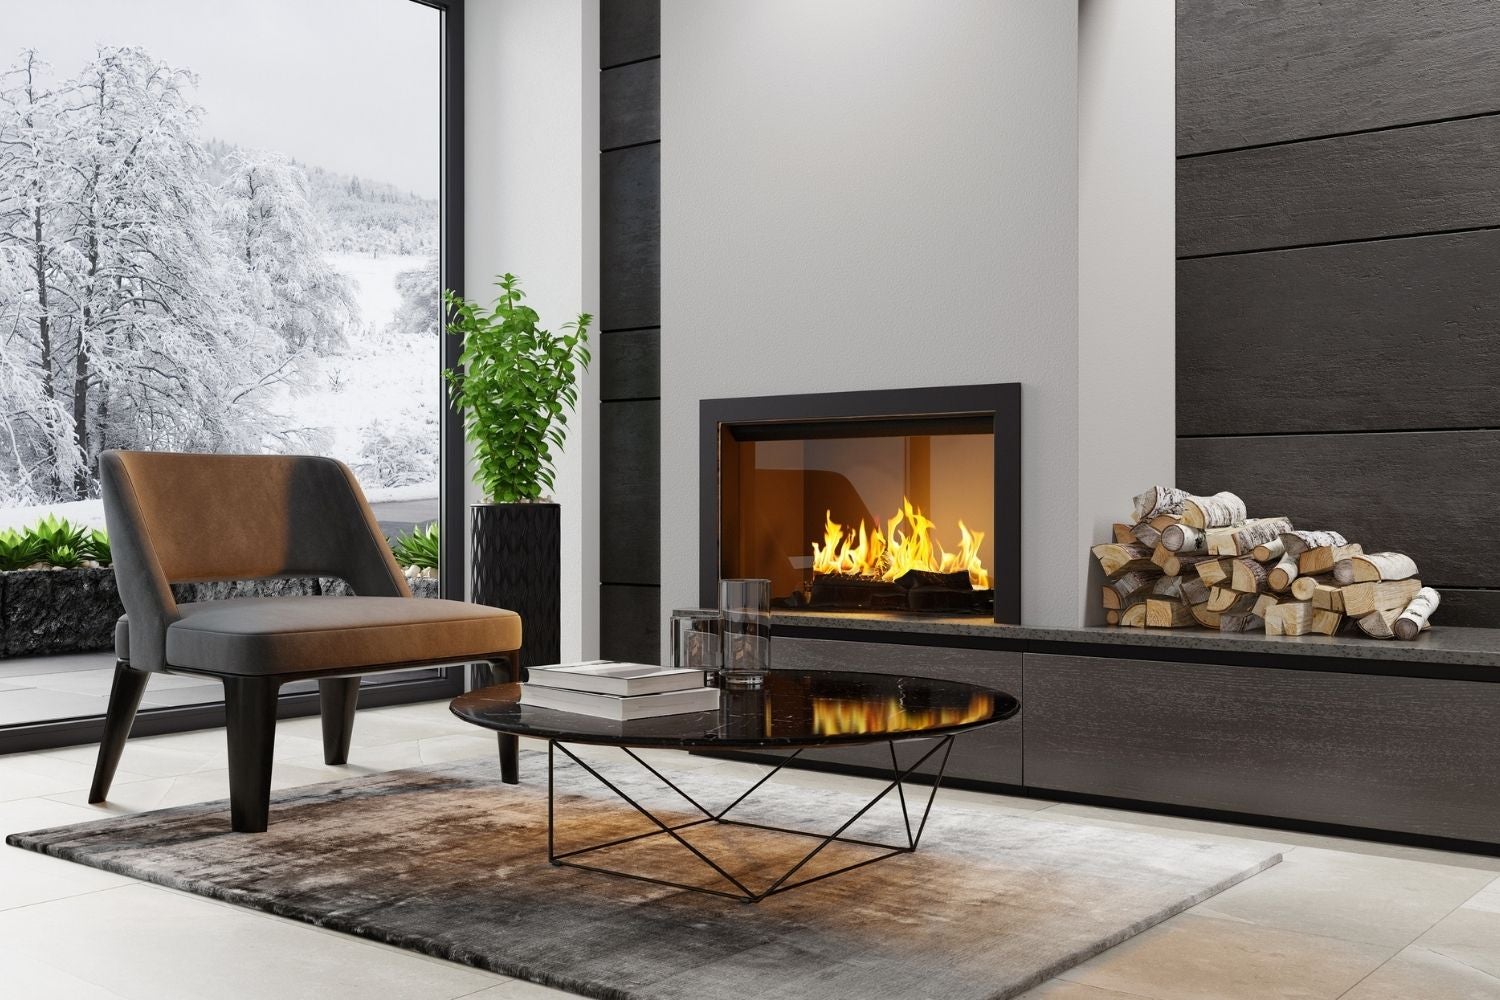 How Hot Does A Gas Fireplace Get